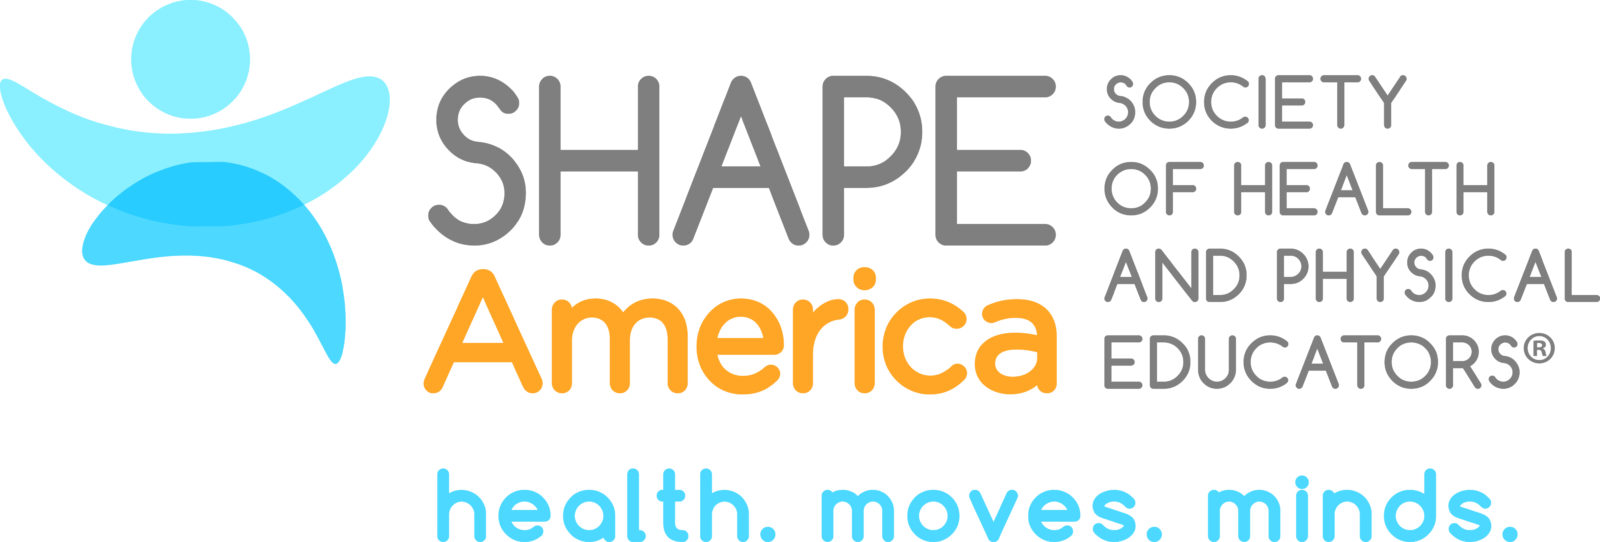 SHAPE America – Society of Health and Physical Educators